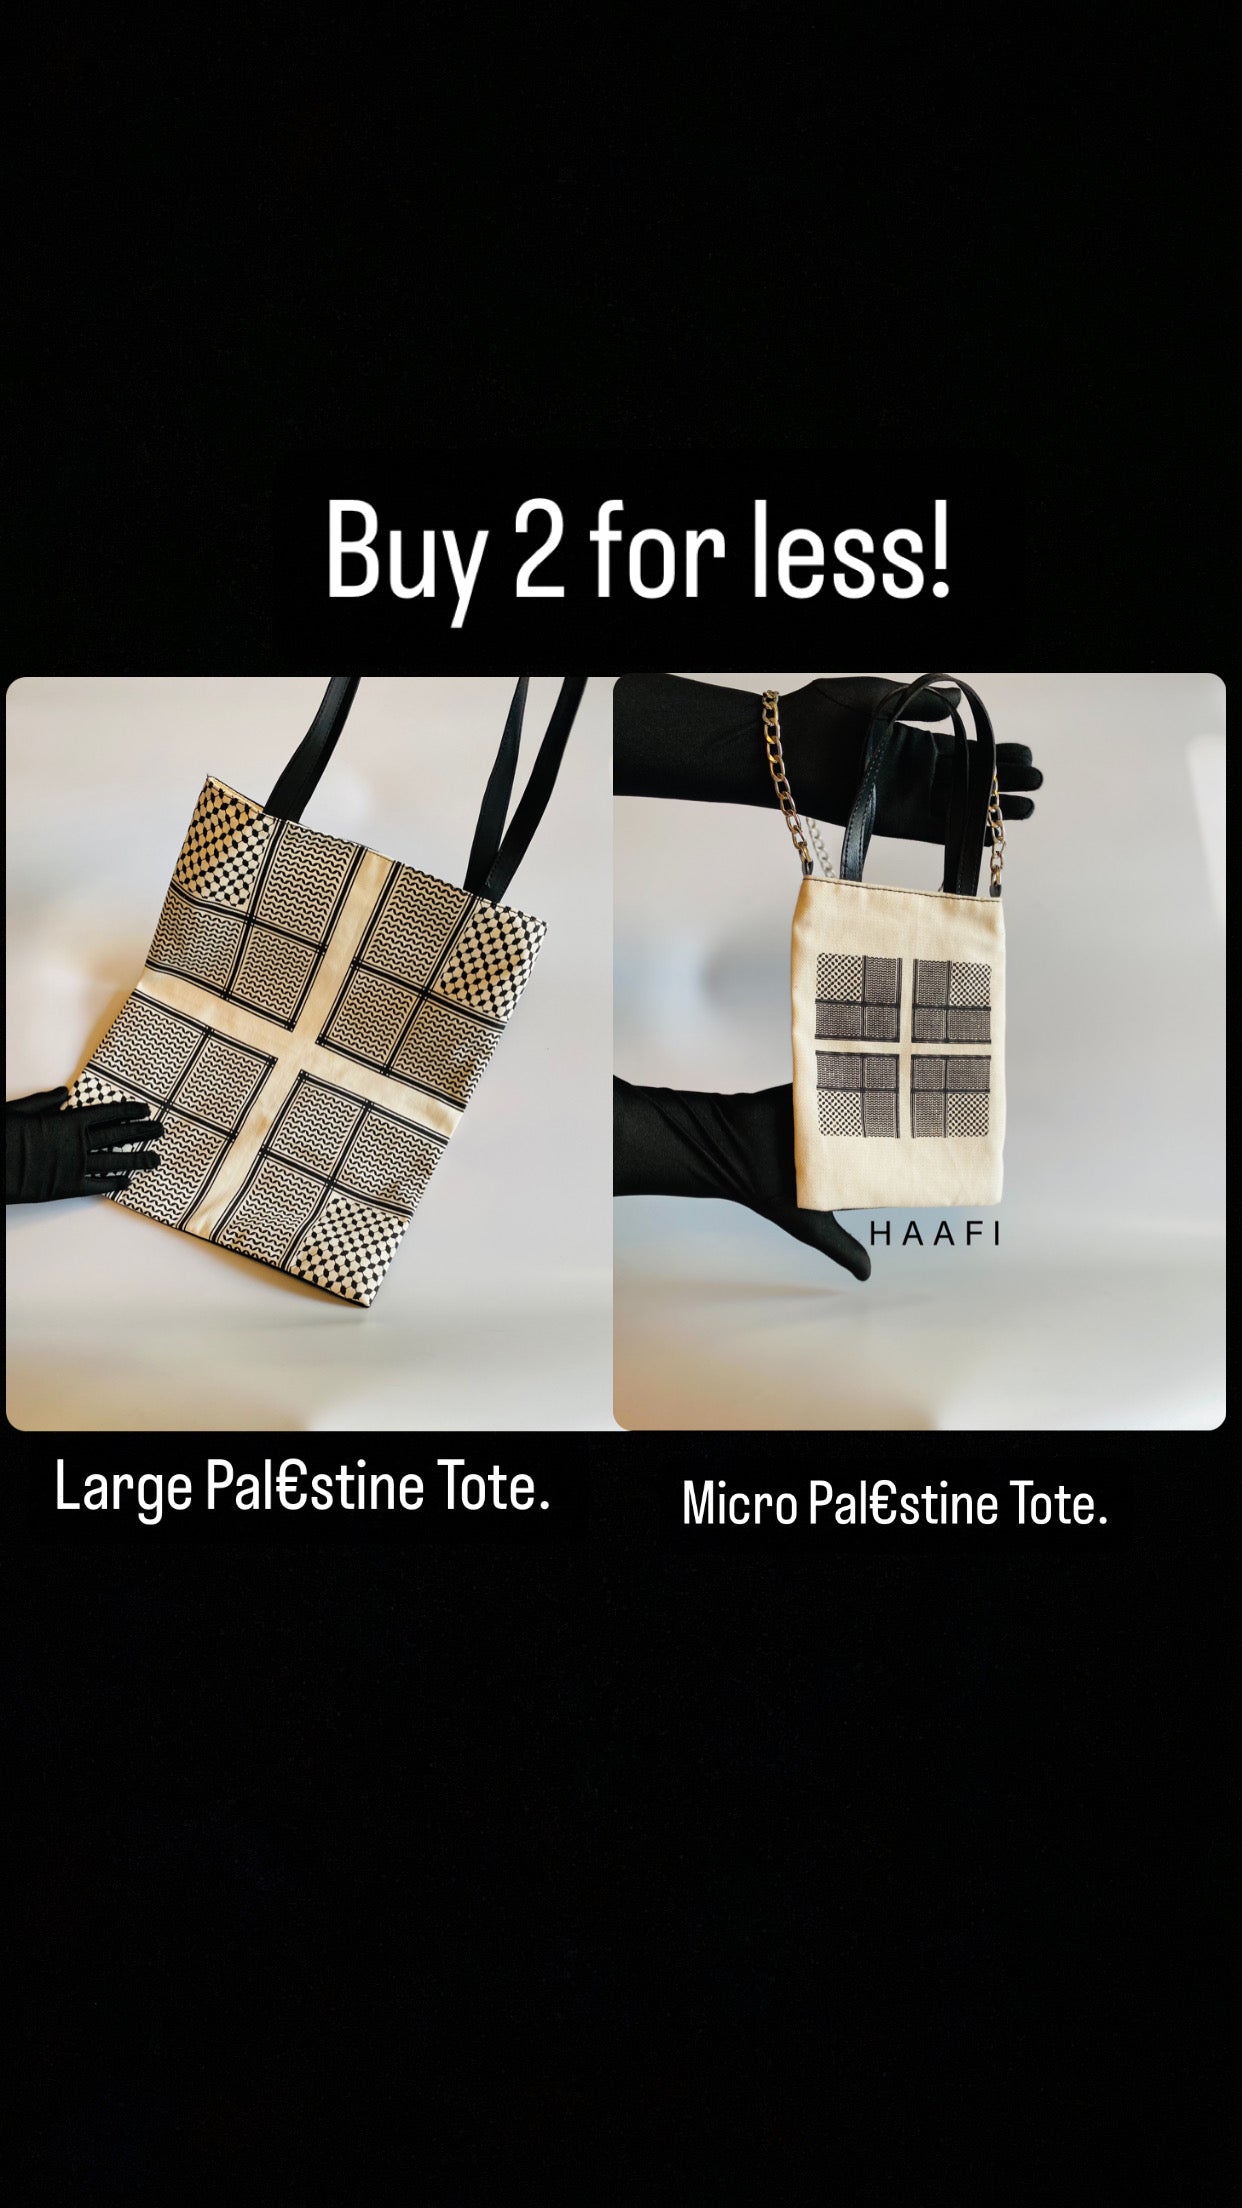 Large & Micro Palestine Totes Deal .